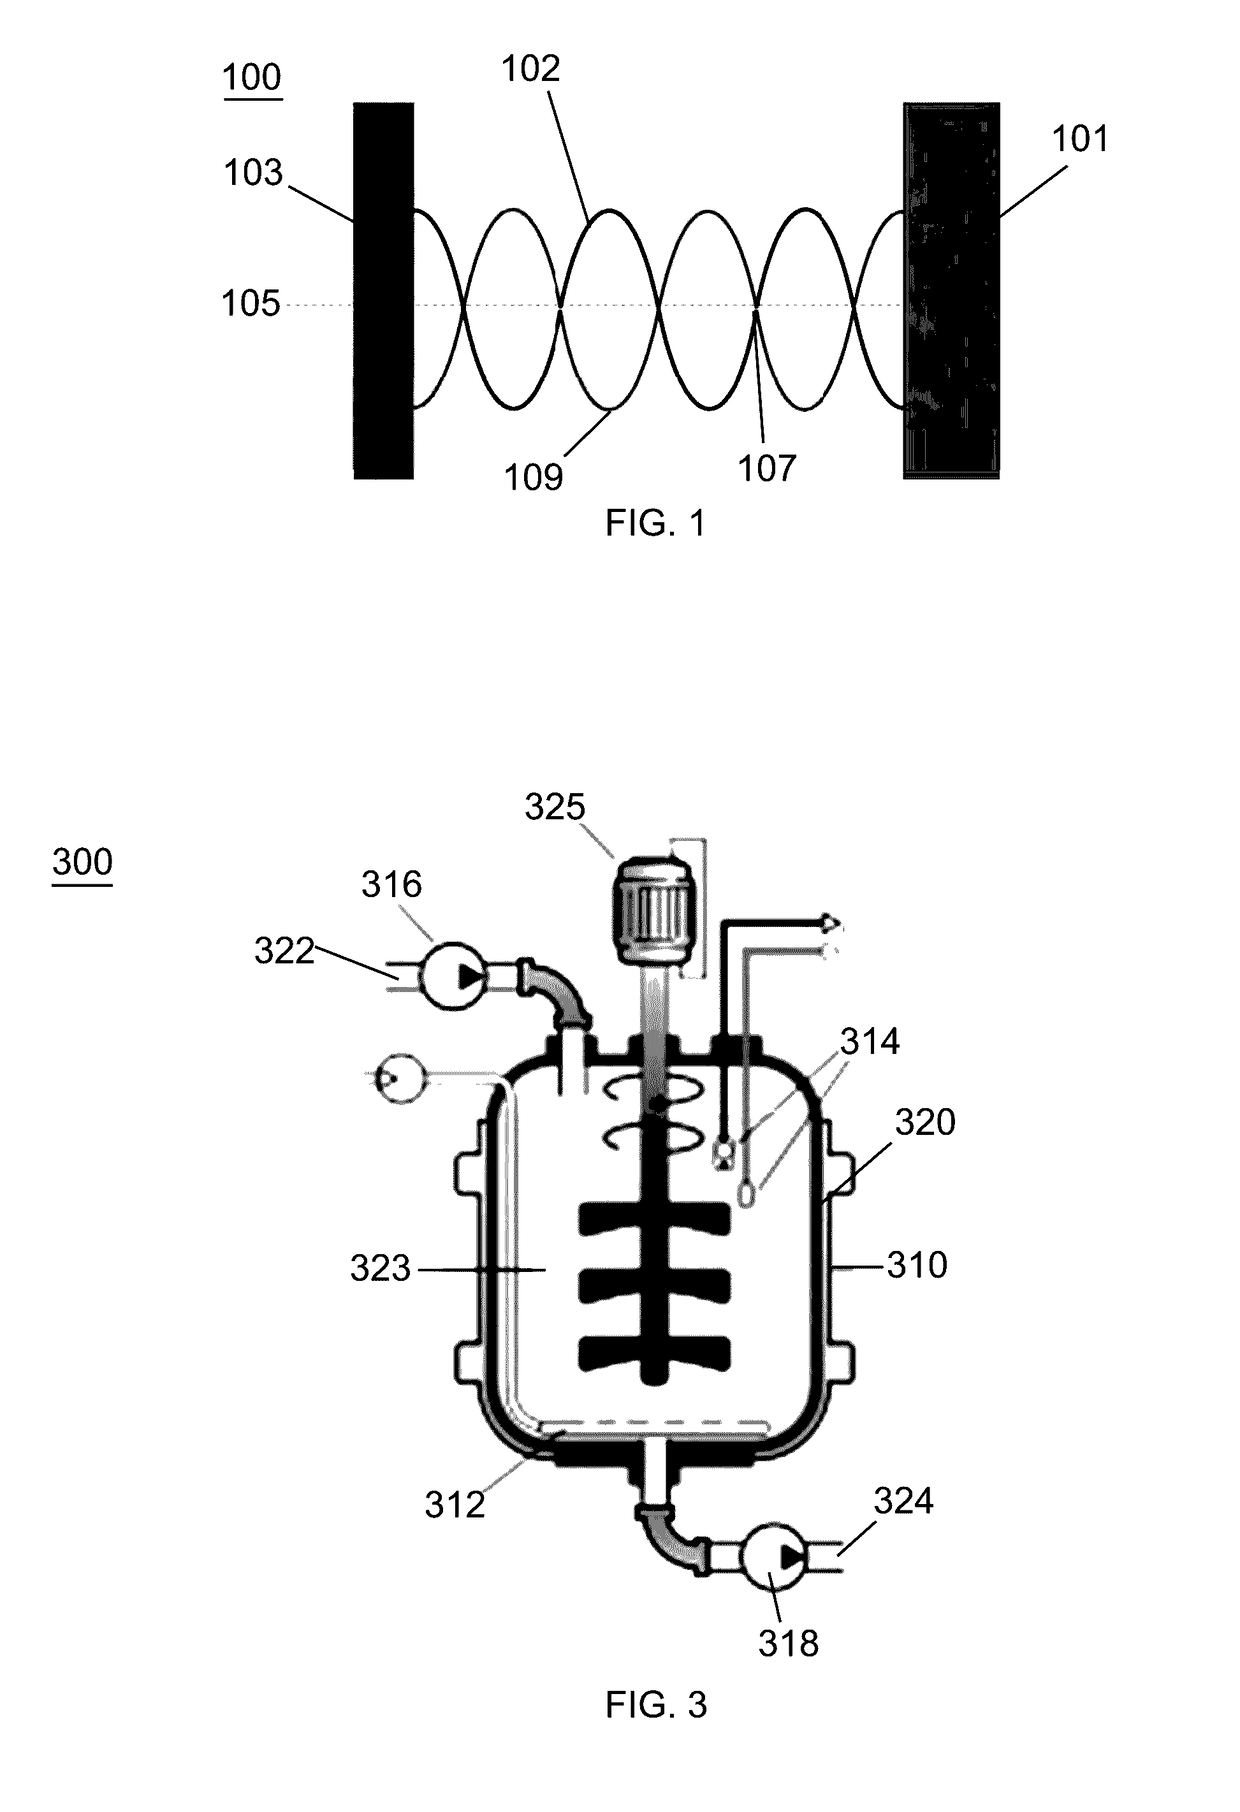 Acoustic perfusion devices